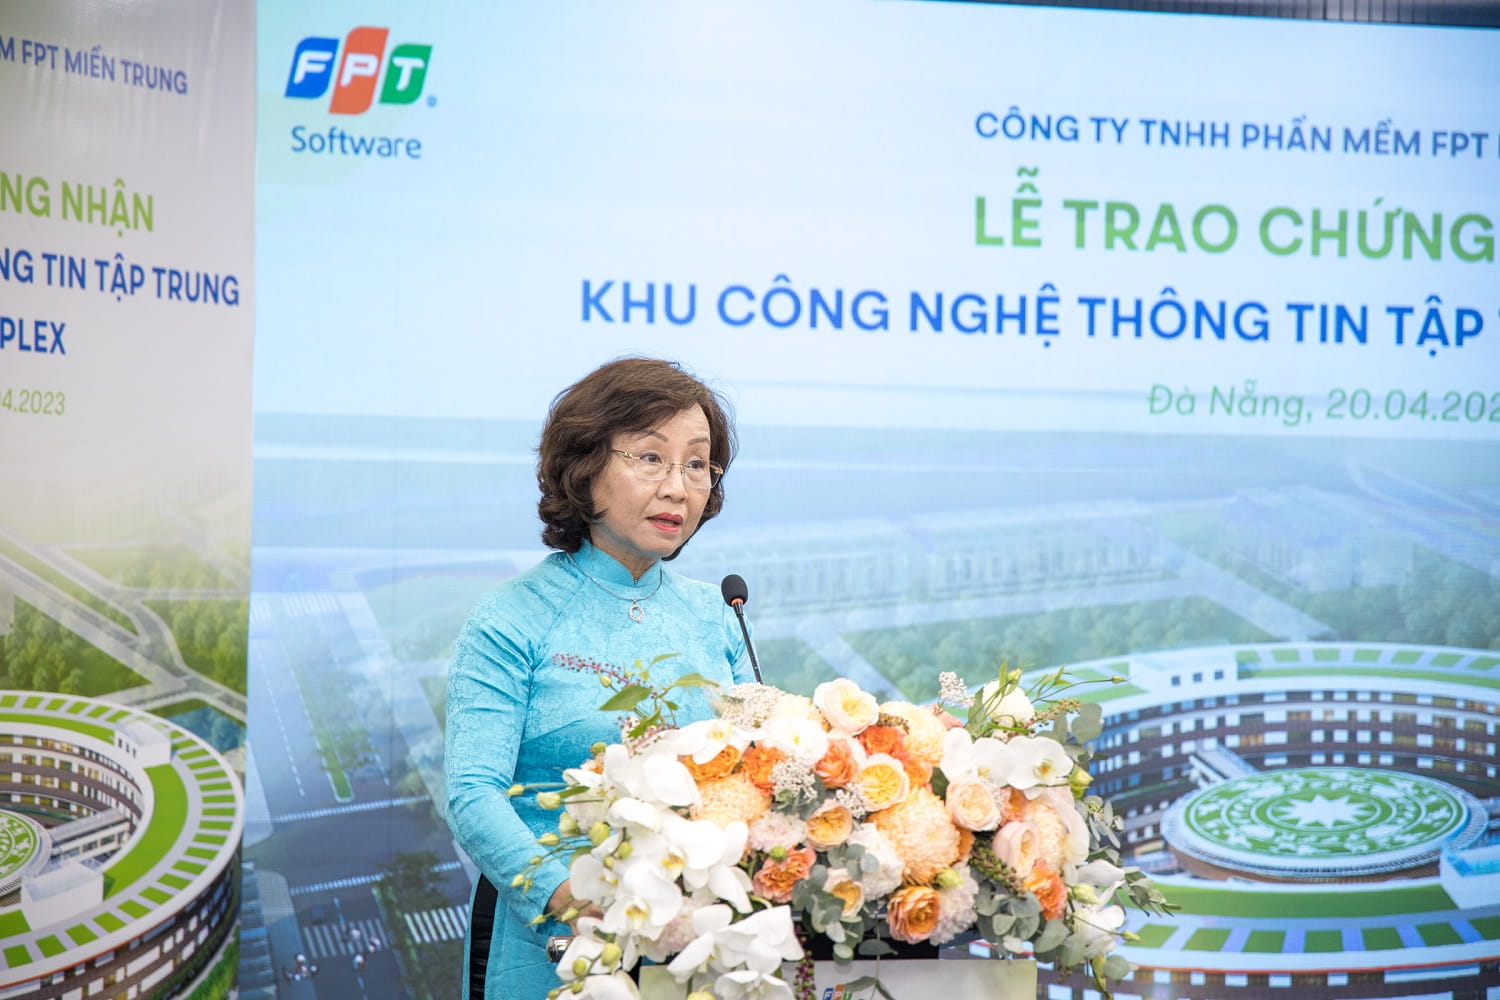 Ms. Ngo Thi Kim Yen - a member of the City Party Committee and Deputy Chairwoman of the City People's Committee - was sharing at the event.